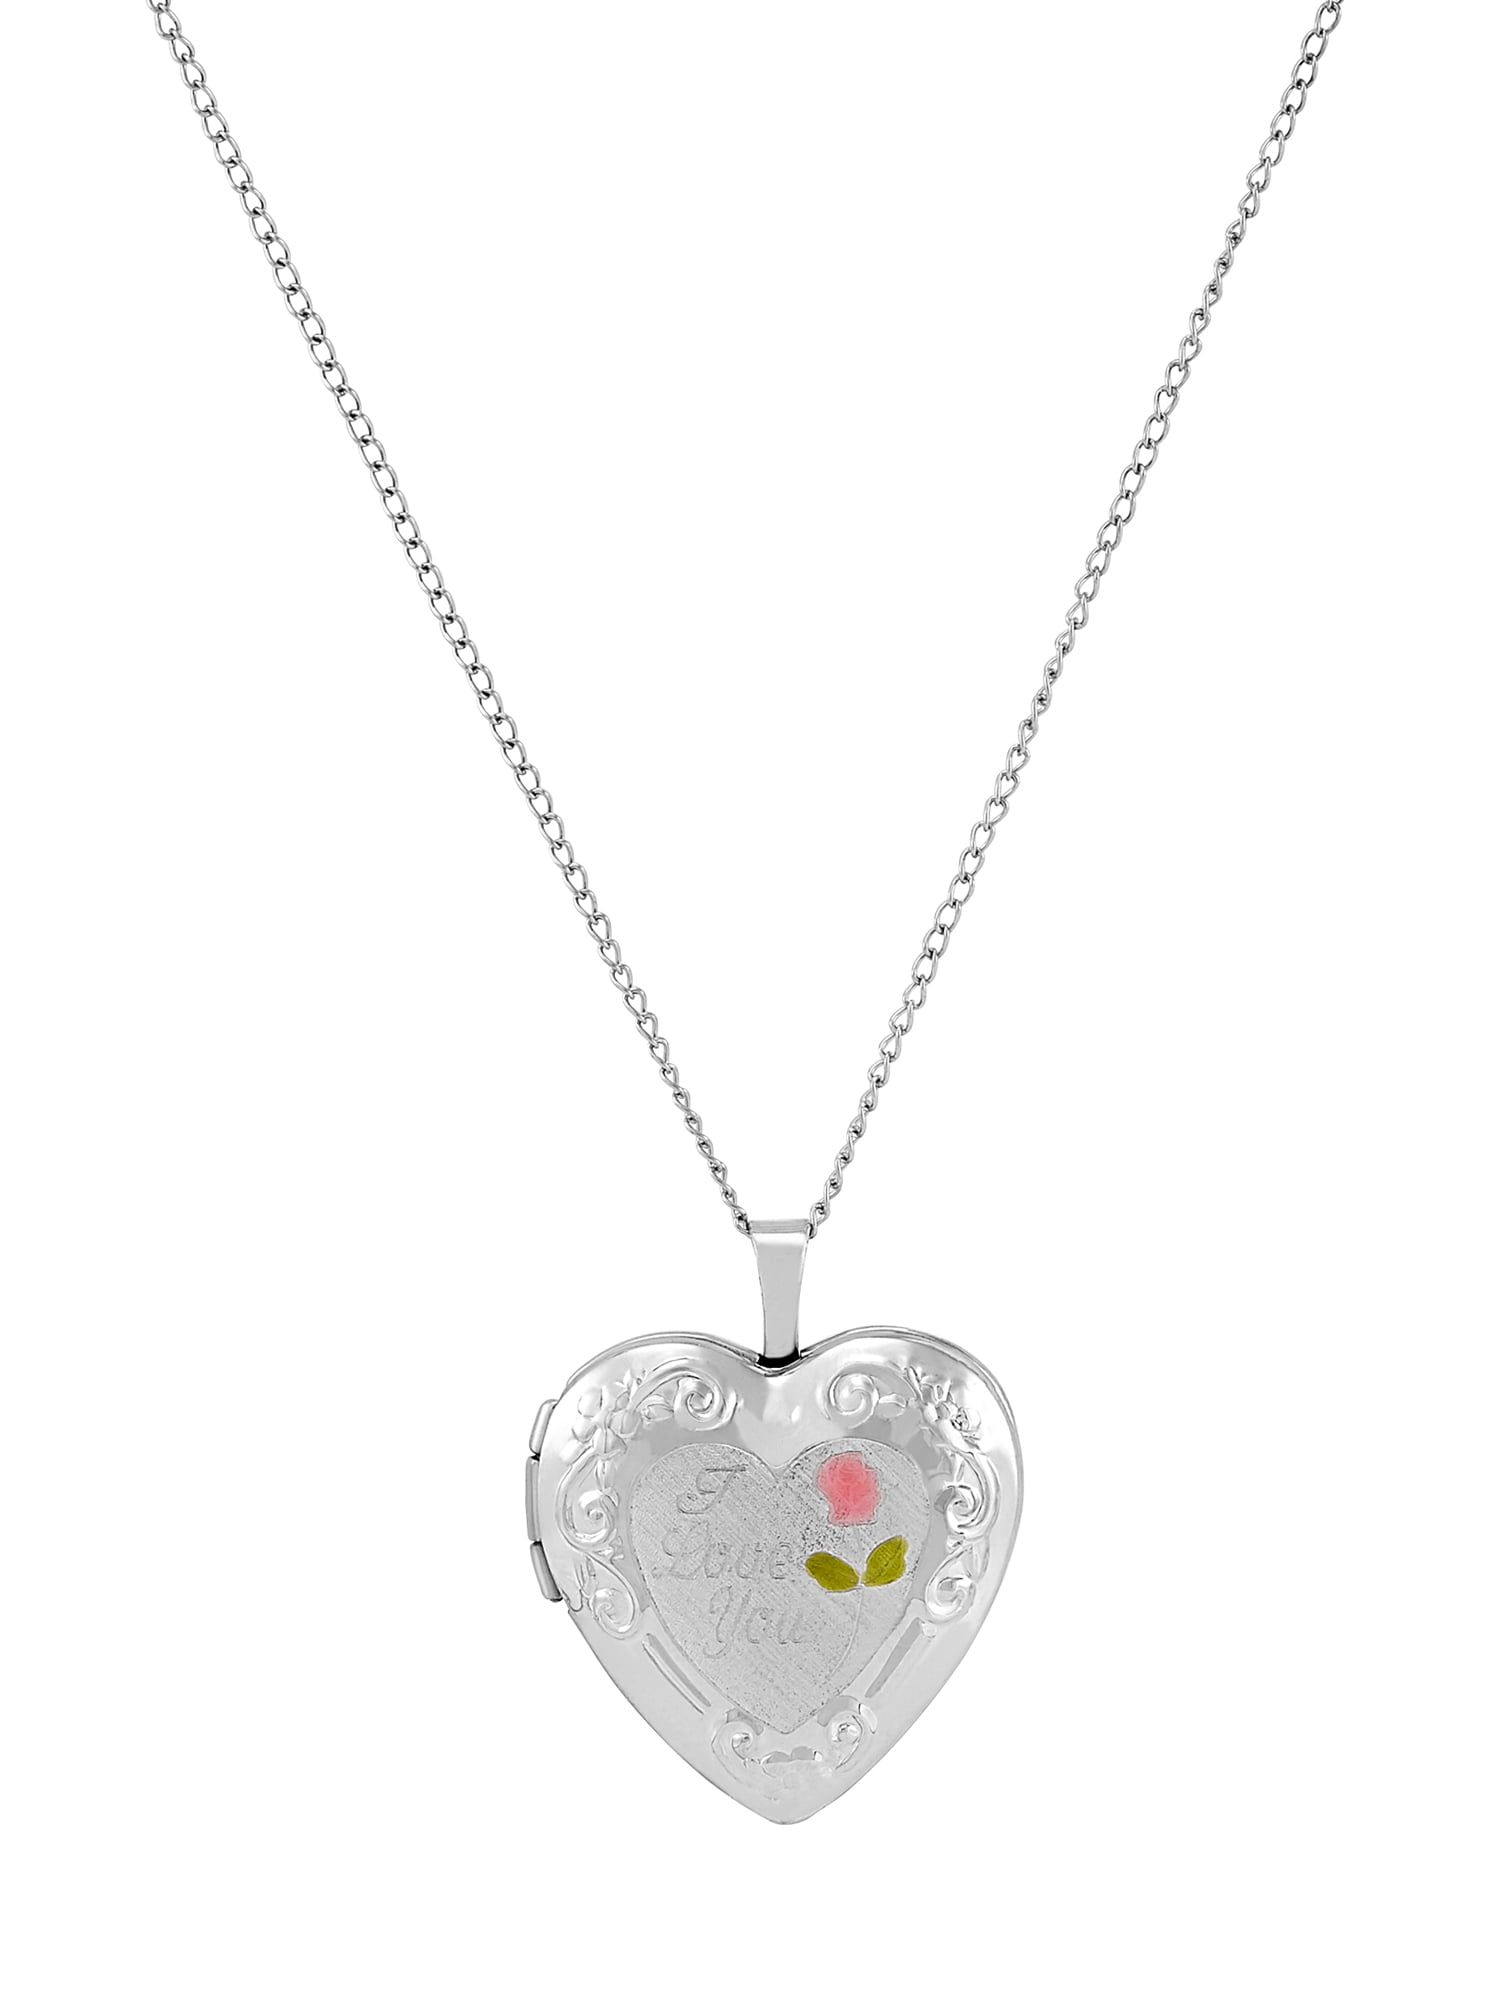 STERLING SILVER NECKLACE LOVE HEART CHARM PENDANT CRYSTAL GIFT FOR HER LOCKET